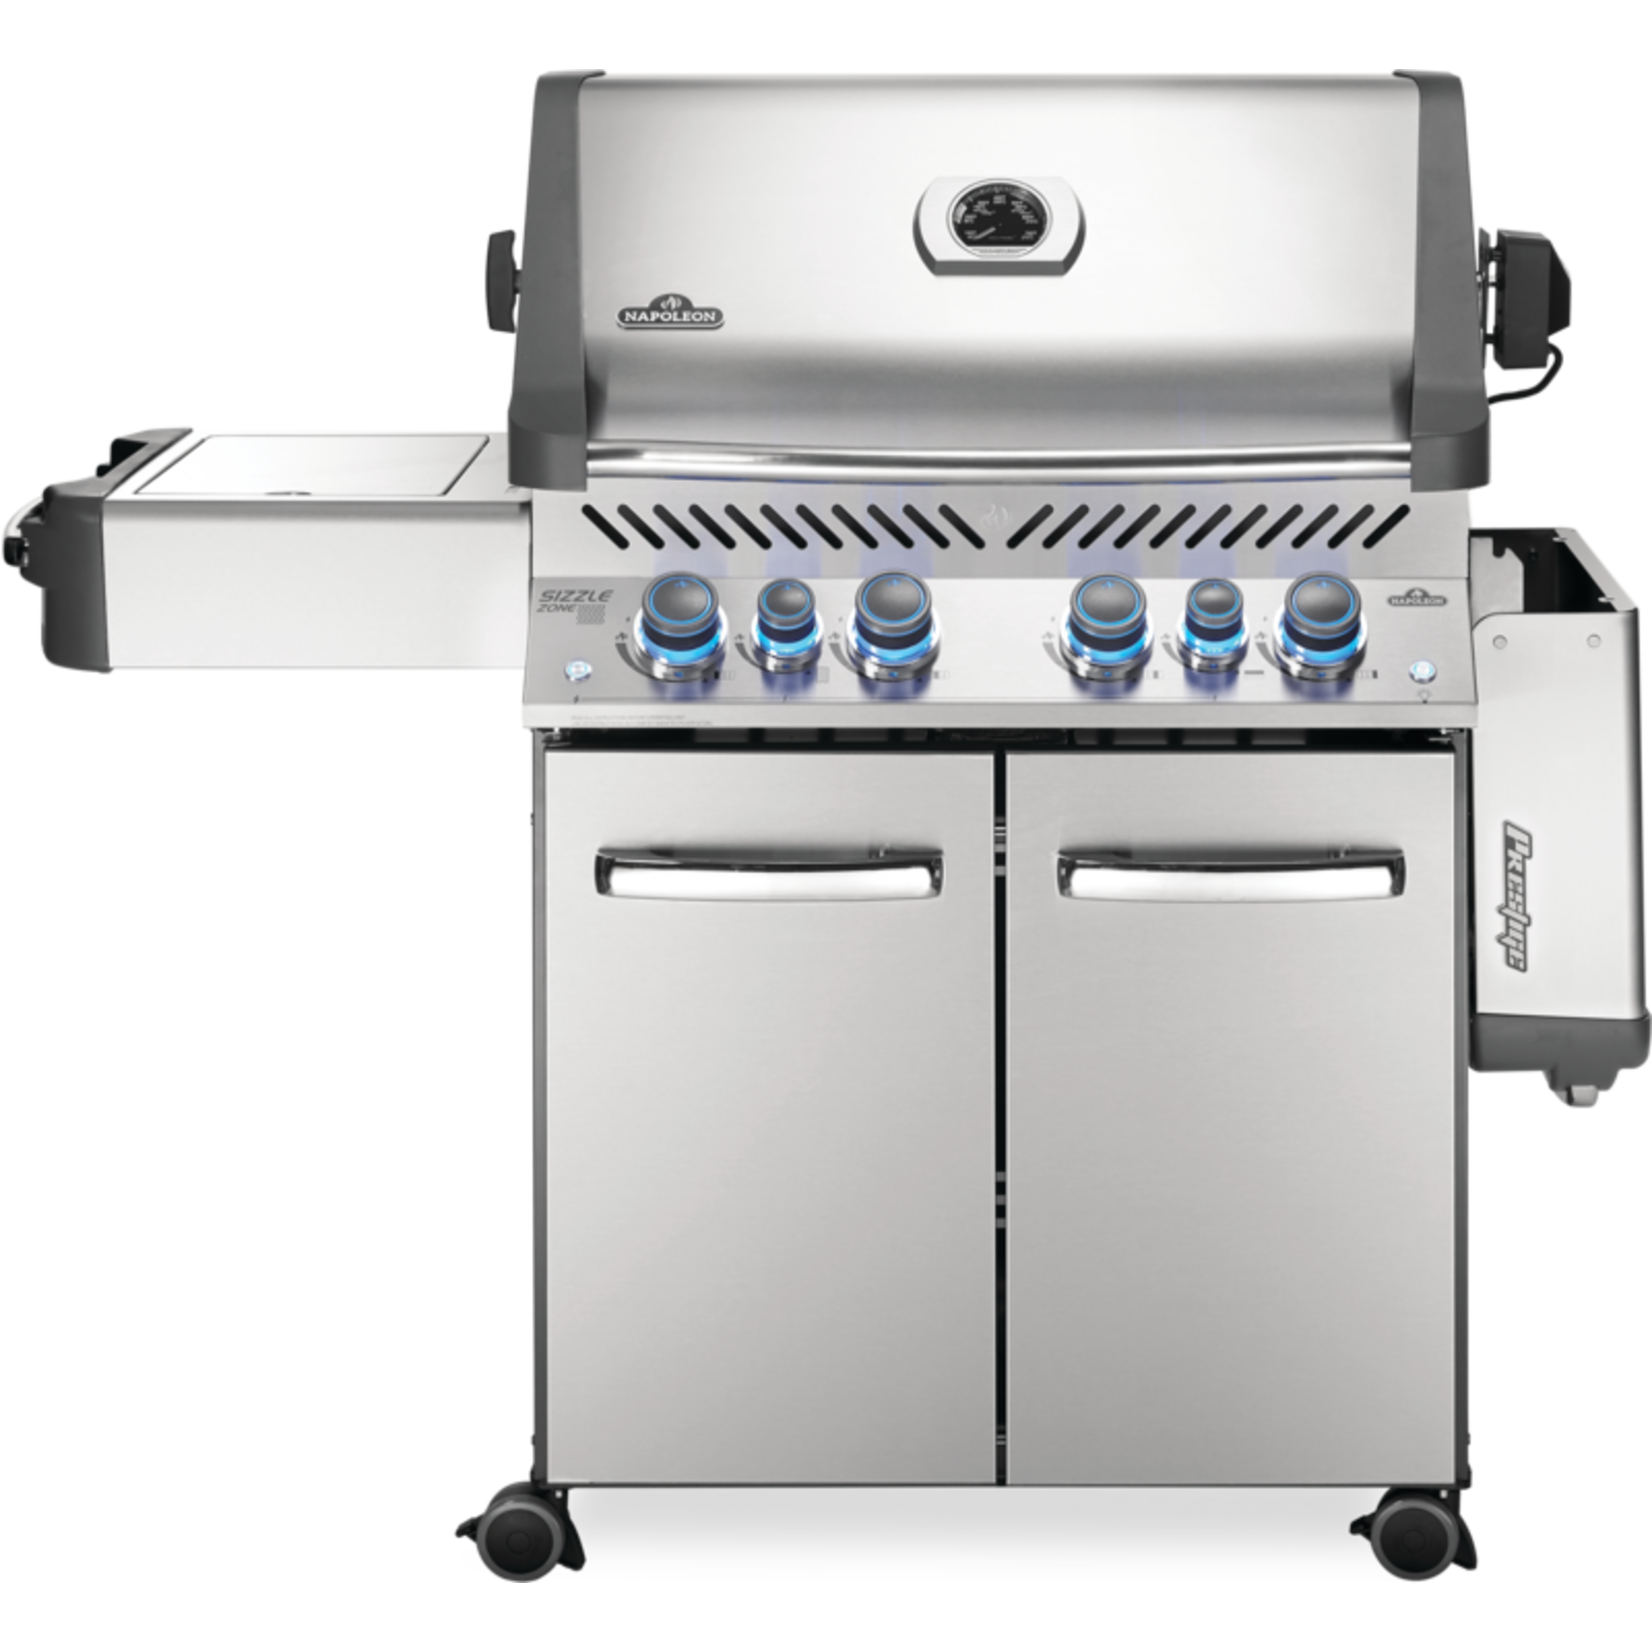 Napoleon Prestige® 500 Natural Gas Grill with Infrared Side and Rear Burners, Stainless Steel